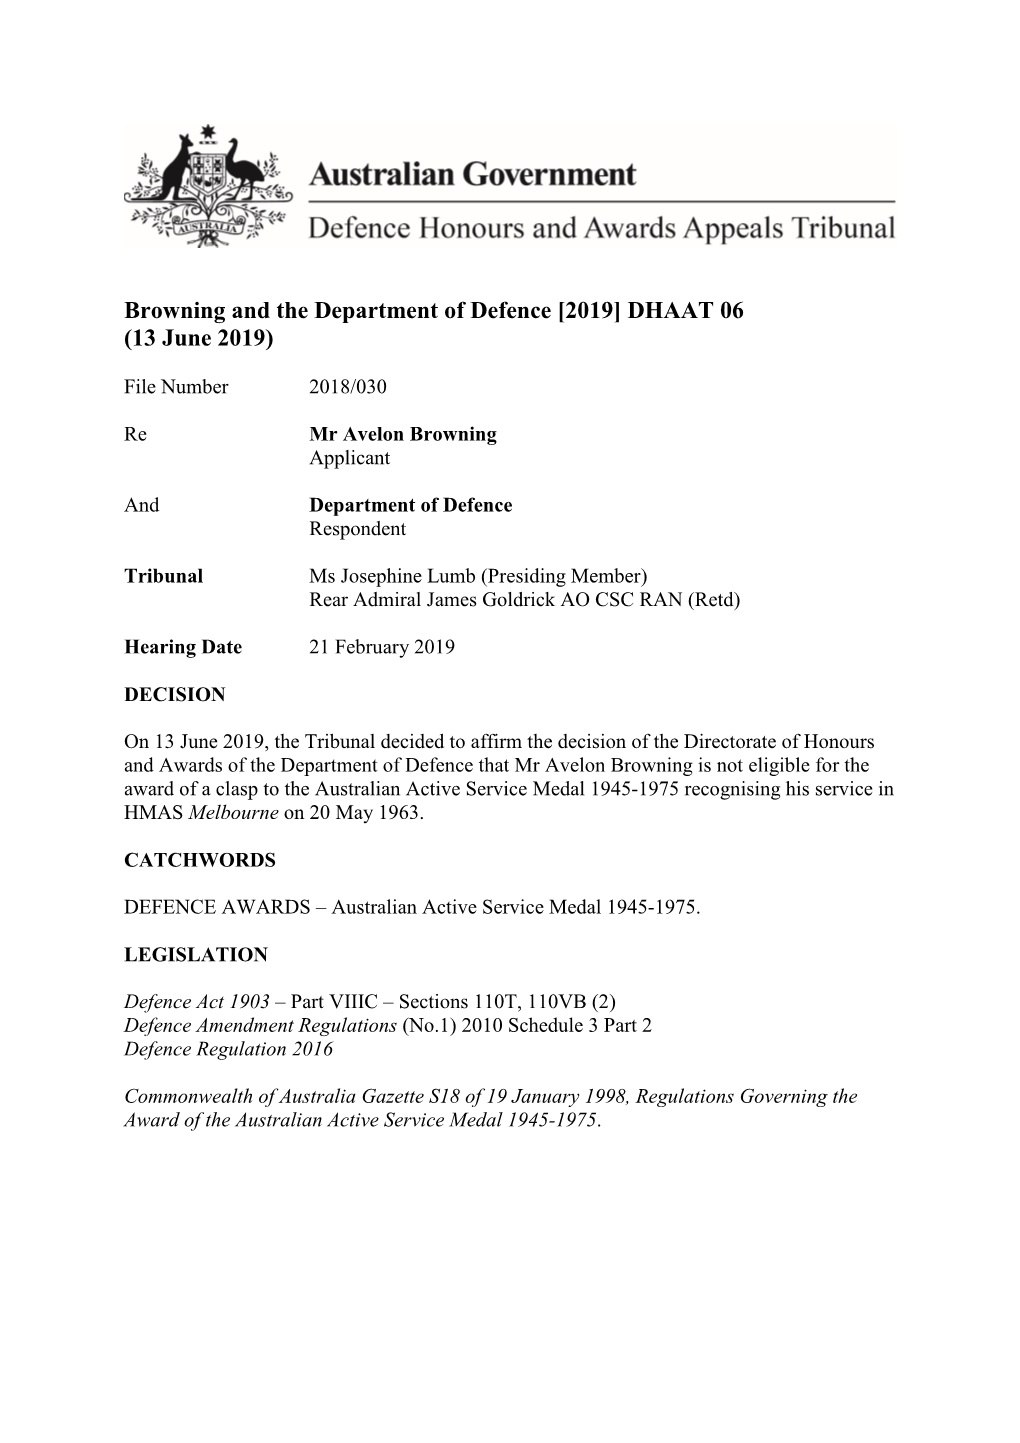 Browning and the Department of Defence [2019] DHAAT 06 (13 June 2019)